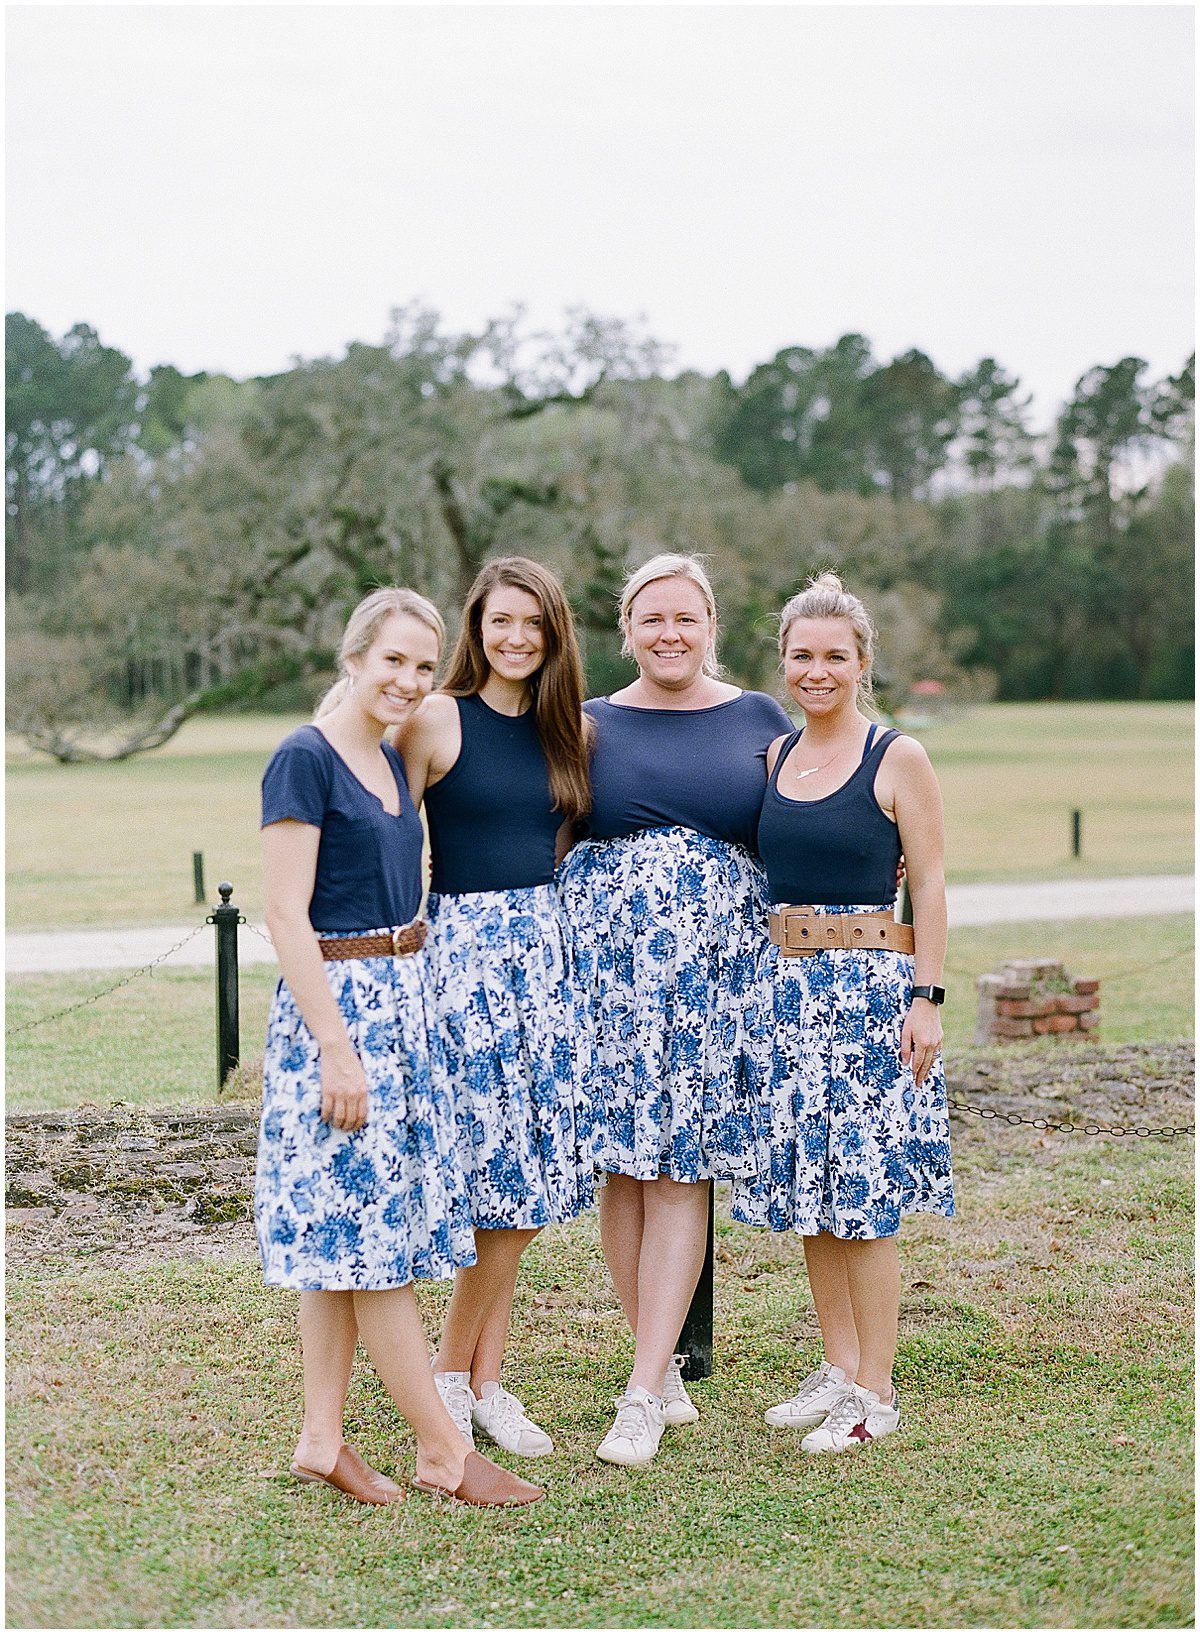 Fox Events Team with Lauren Fox in Toile Skirts Photo